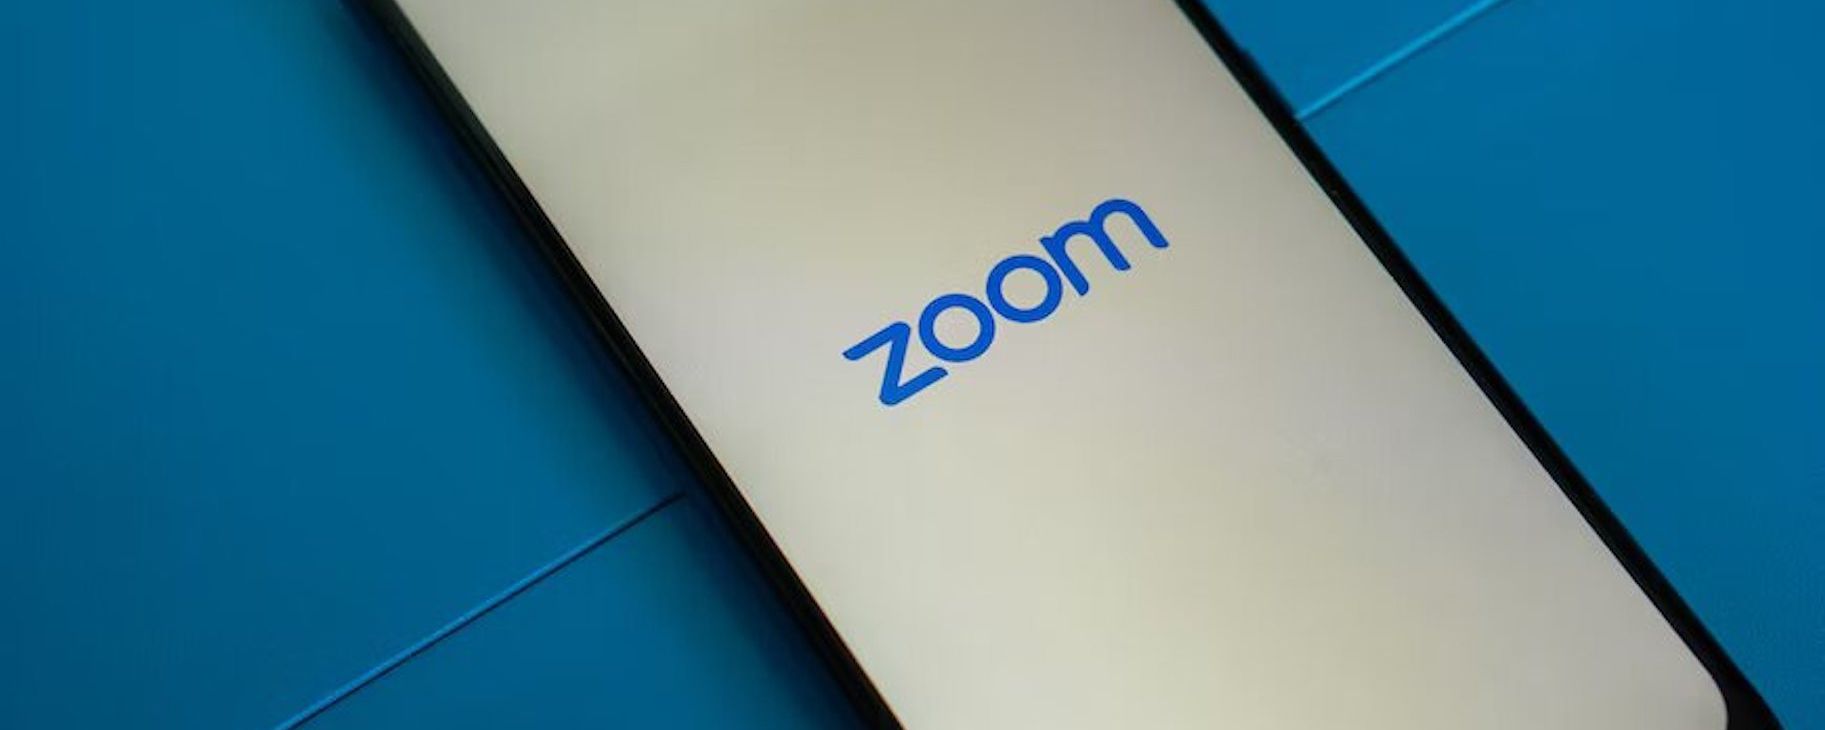 How To Record a Zoom Meeting Without Permission